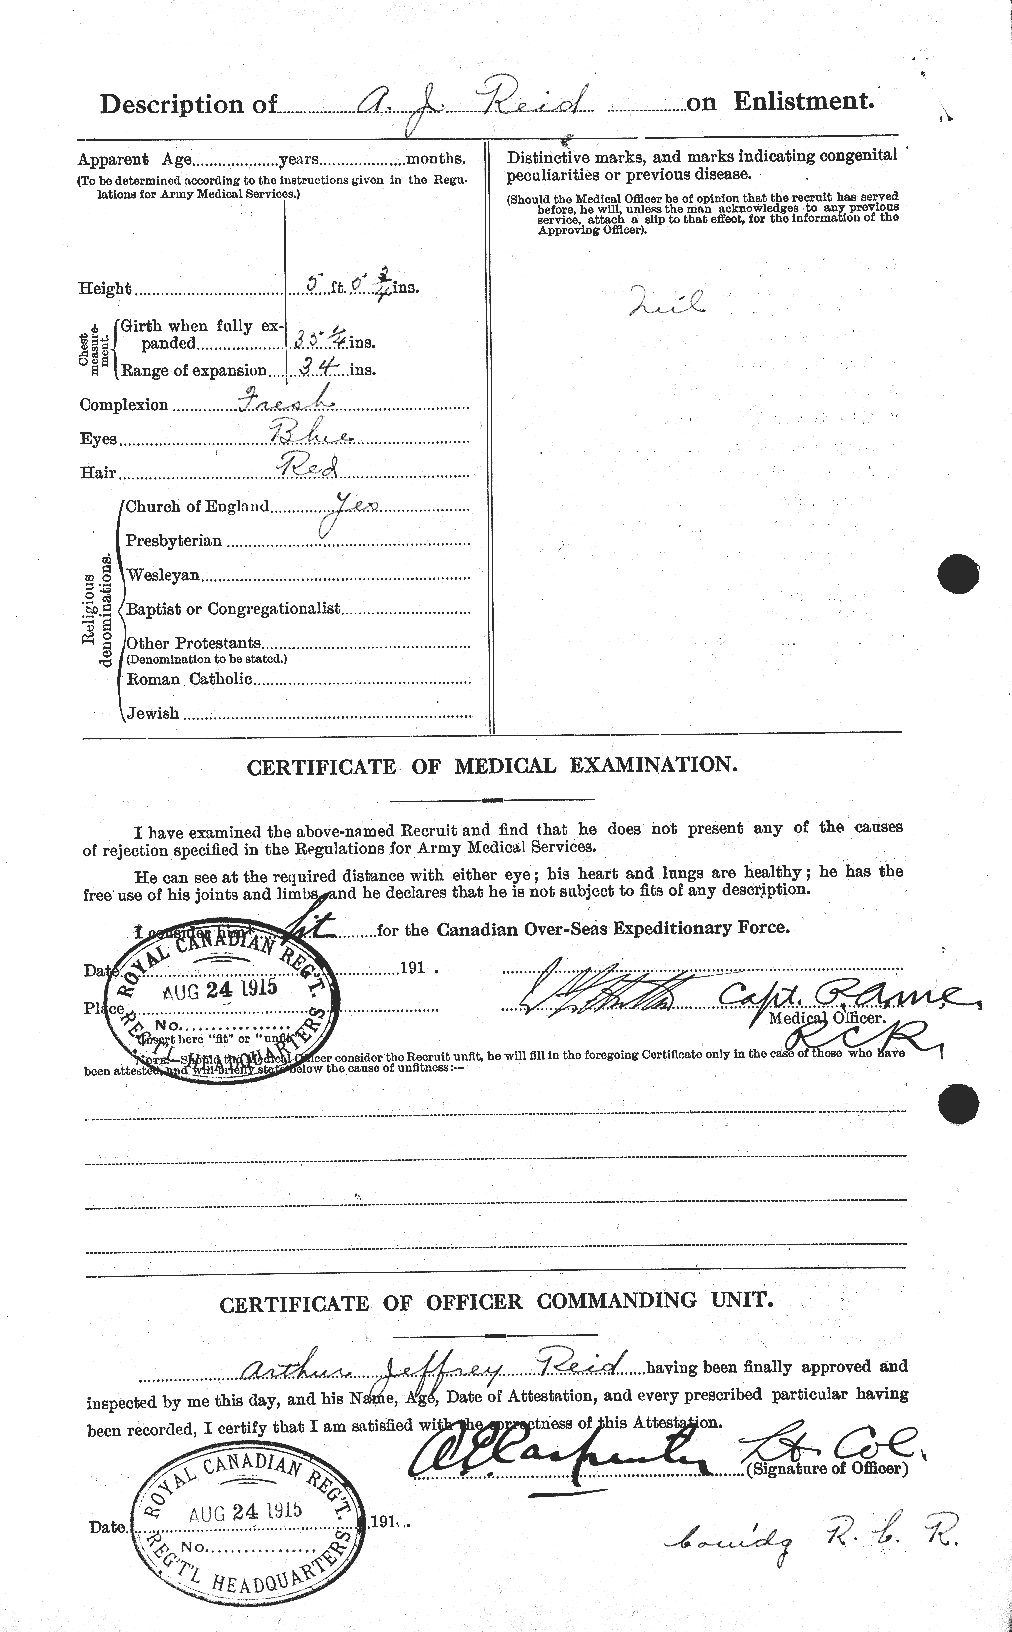 Personnel Records of the First World War - CEF 597842b